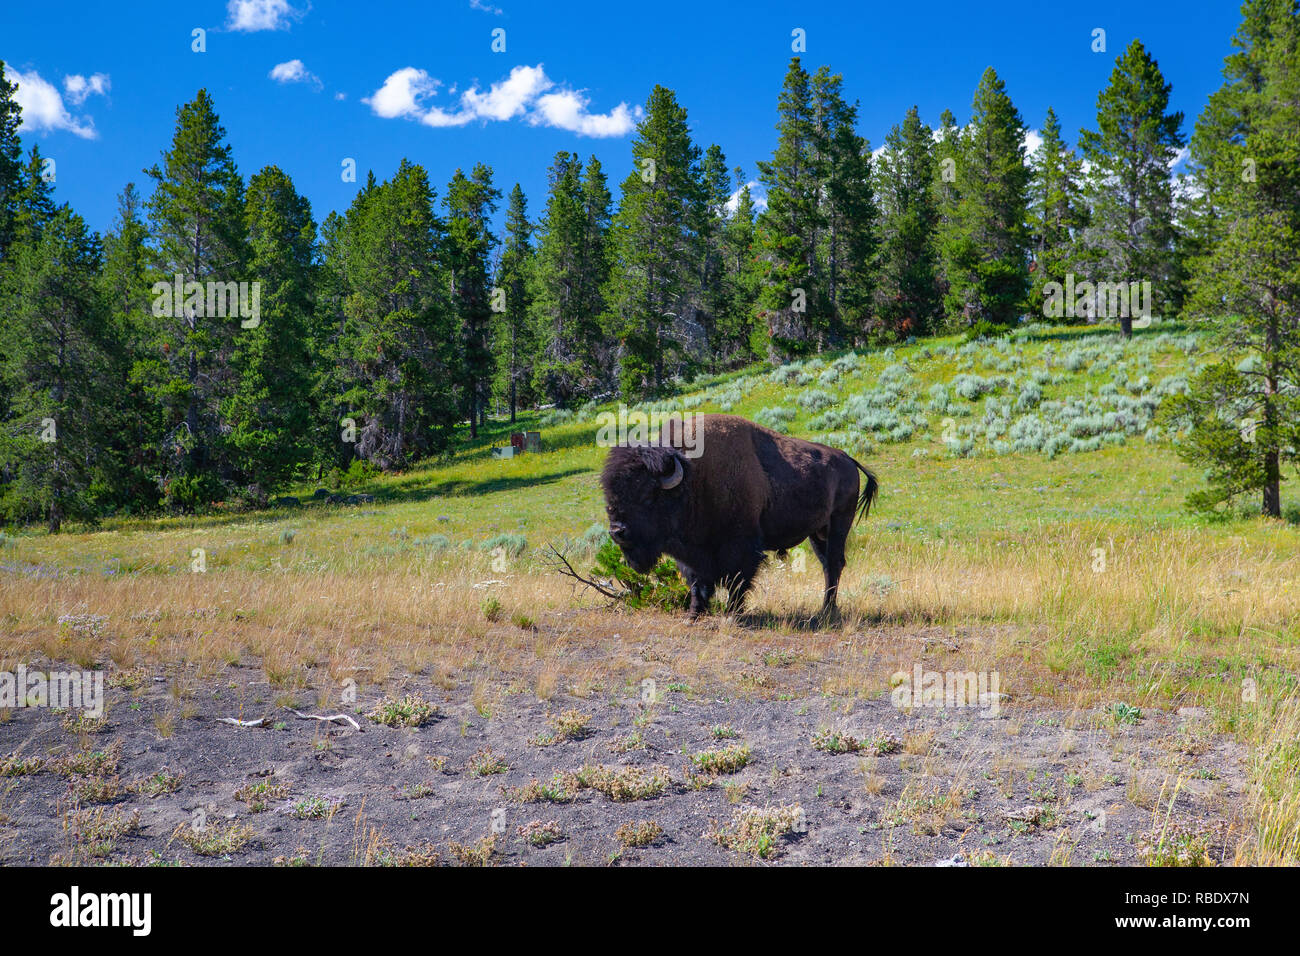 The bison in Yellowstone National Park, Wyoming. USA.  The Yellowstone Park bison herd in Yellowstone National Park is probably the oldest and largest Stock Photo